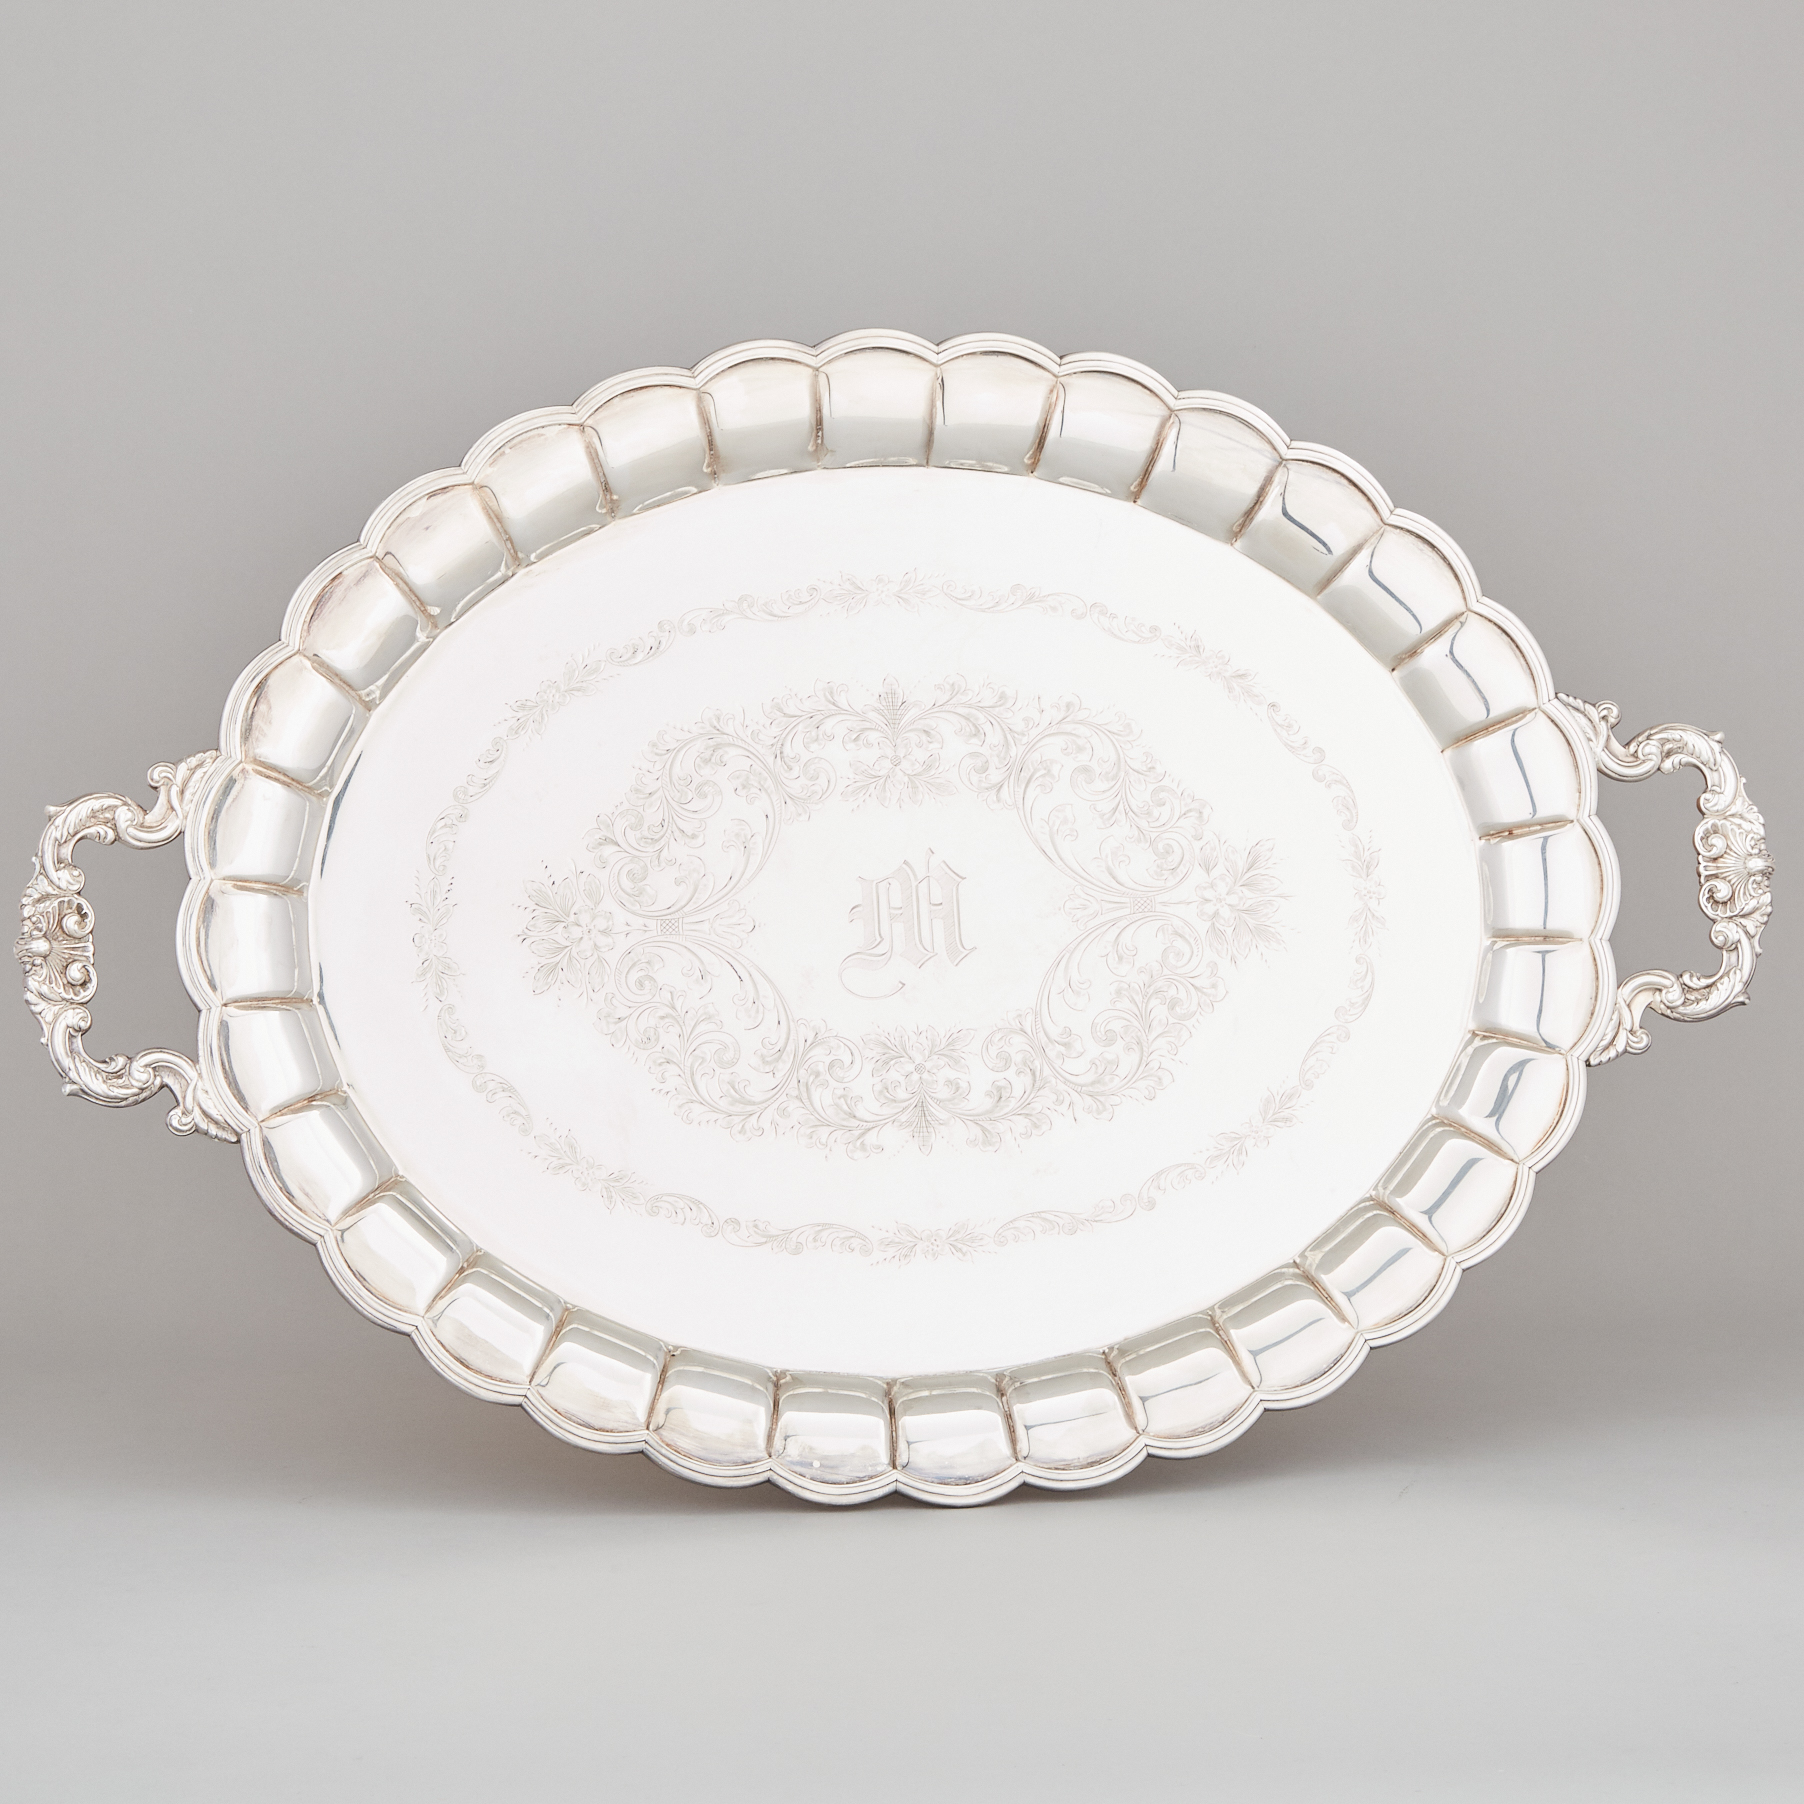 Canadian Silver Oval Two-Handled Serving Tray, Roden Bros., Toronto, Ont., early 20th century